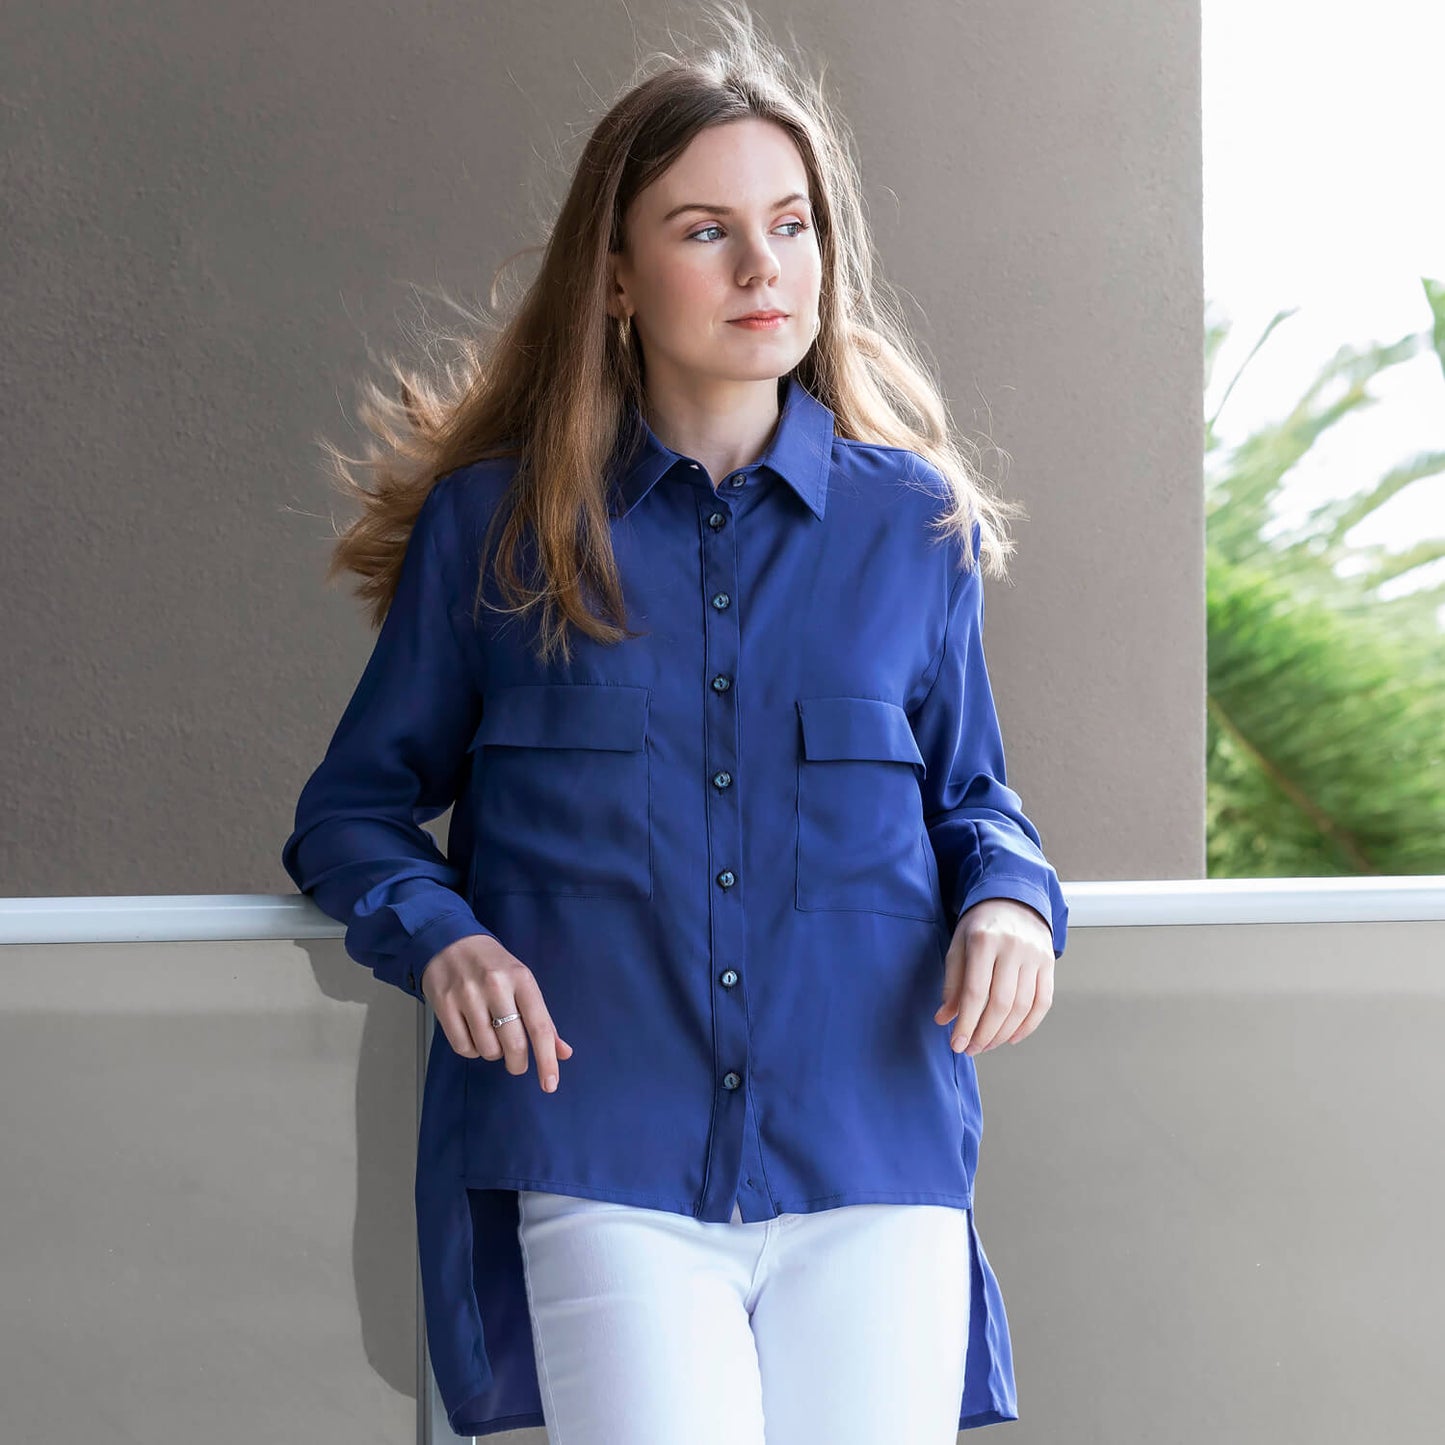 blueberry manhatten long sleeve shirt with white pants by seahorse silks